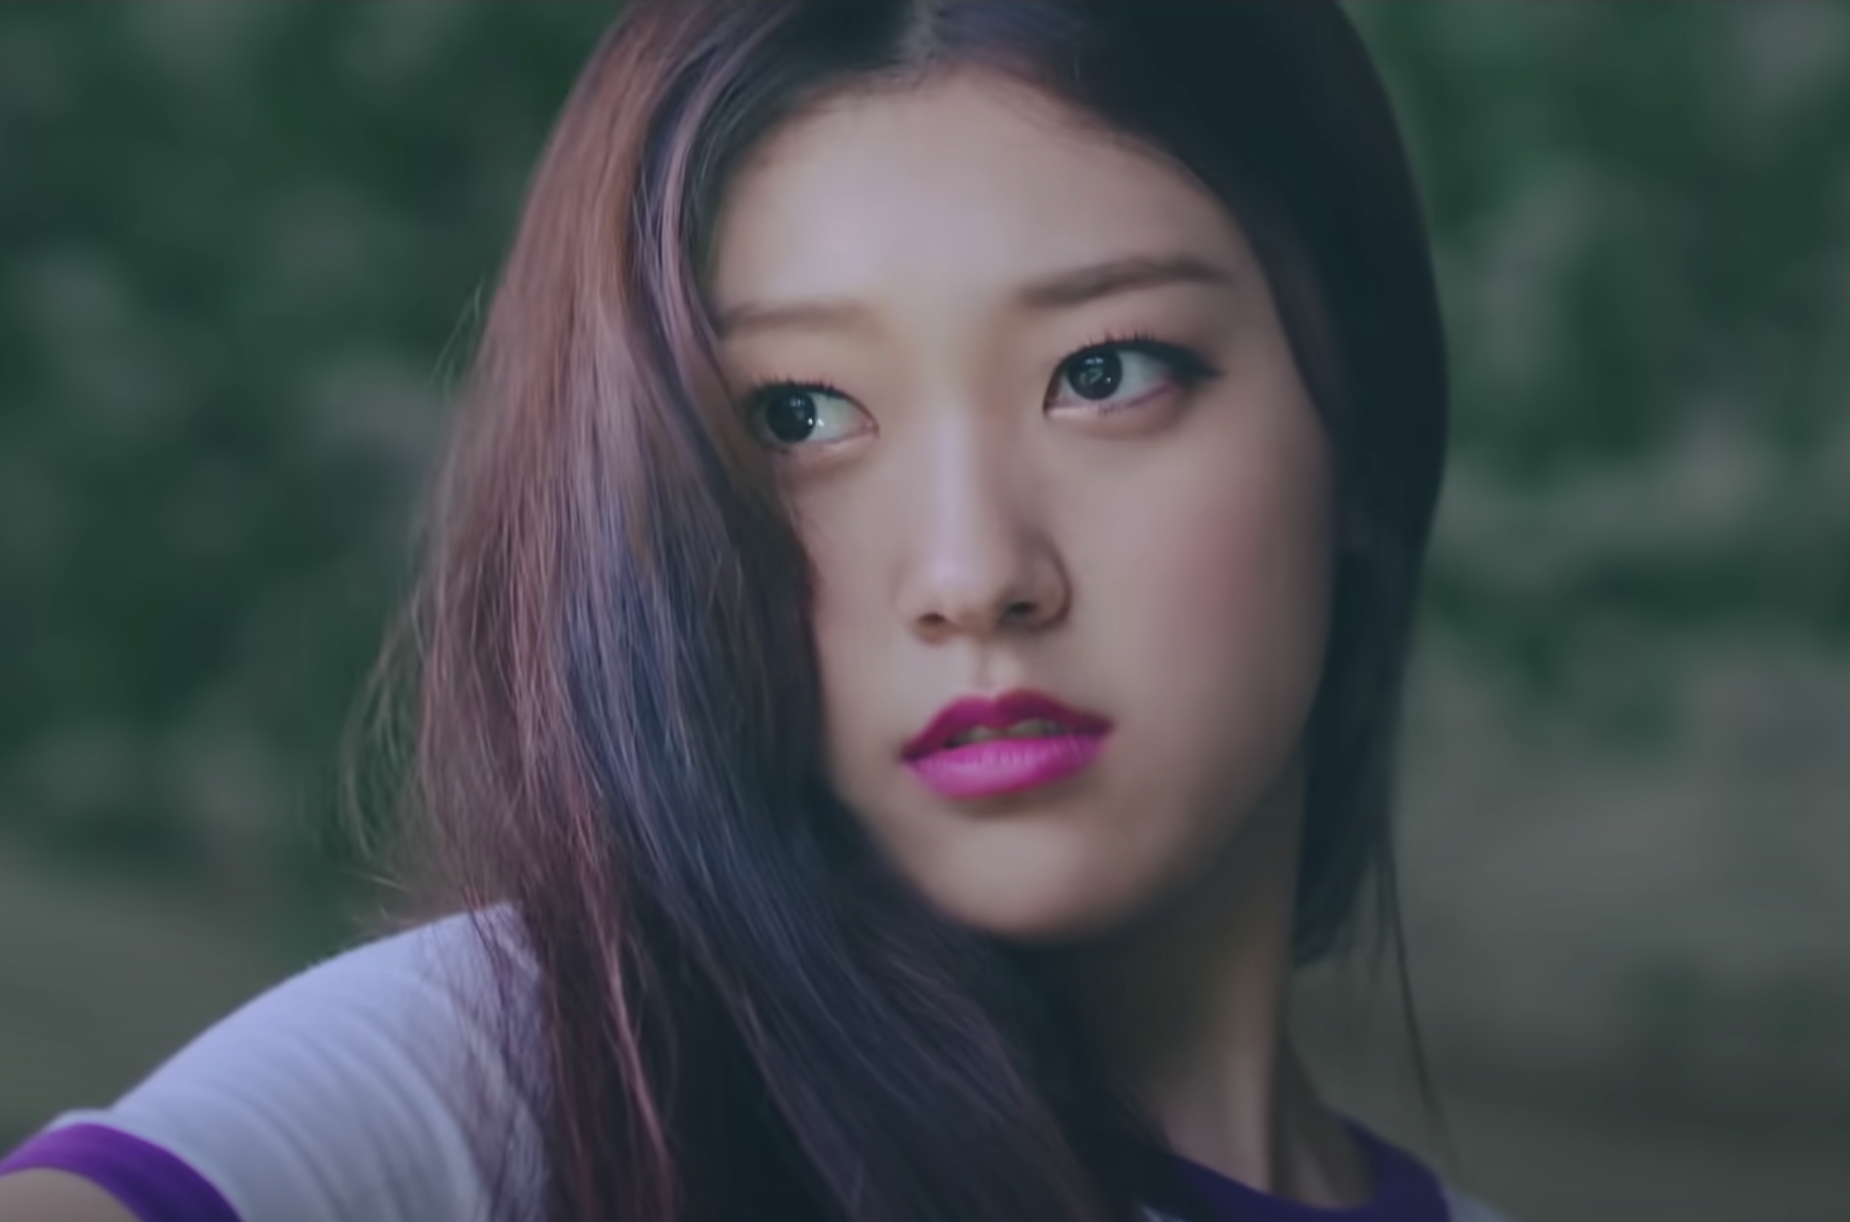 Choerry stands outside in a field and looks on